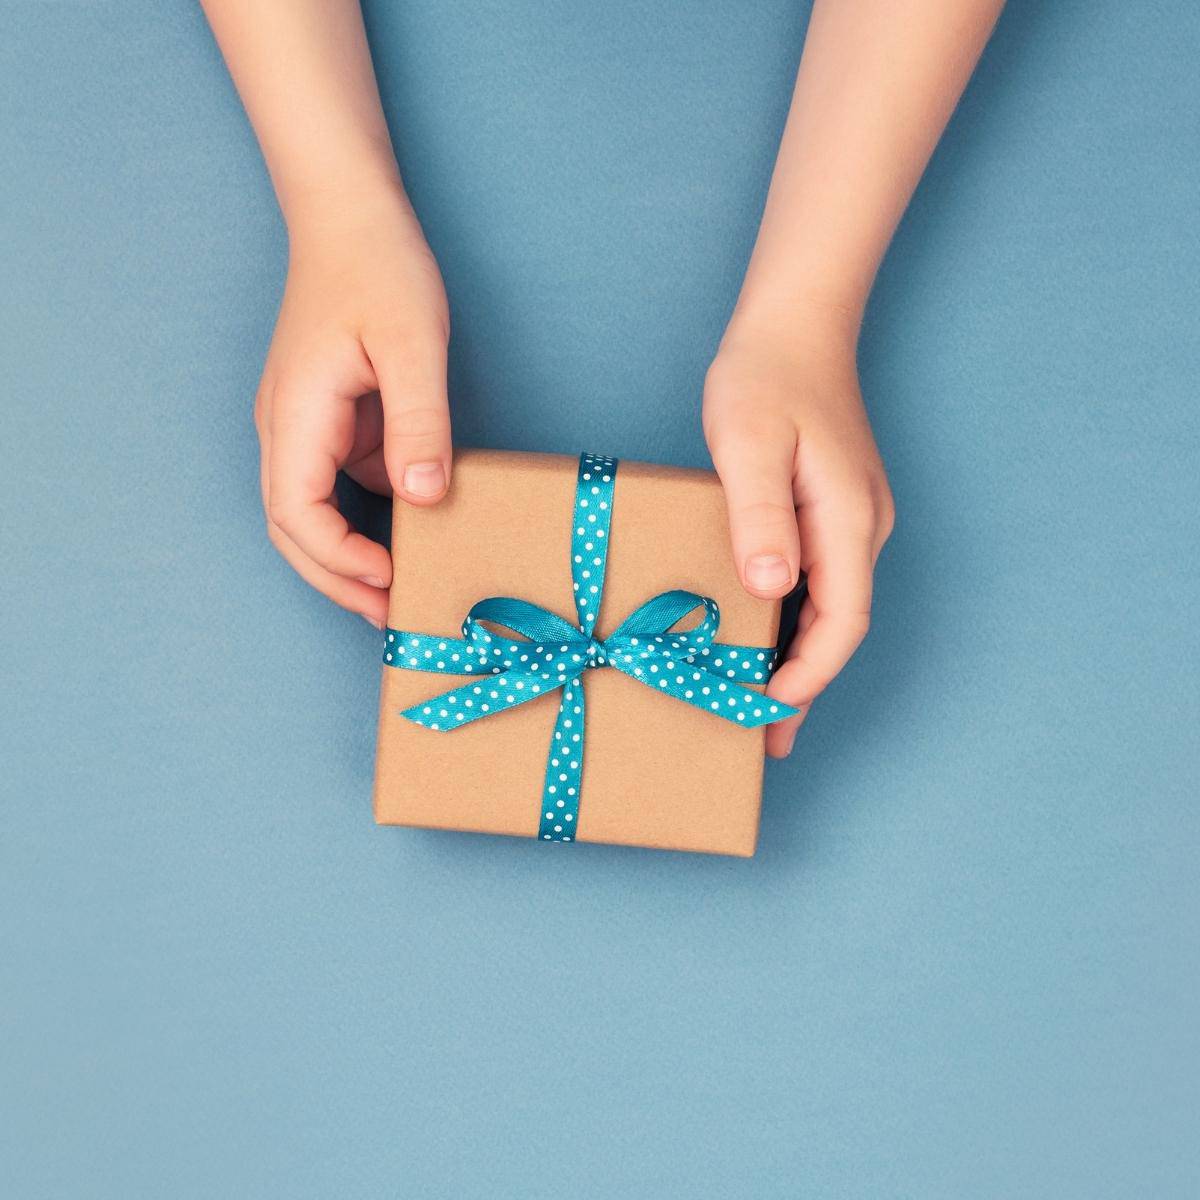 10 Gifts from Small Businesses on Amazon